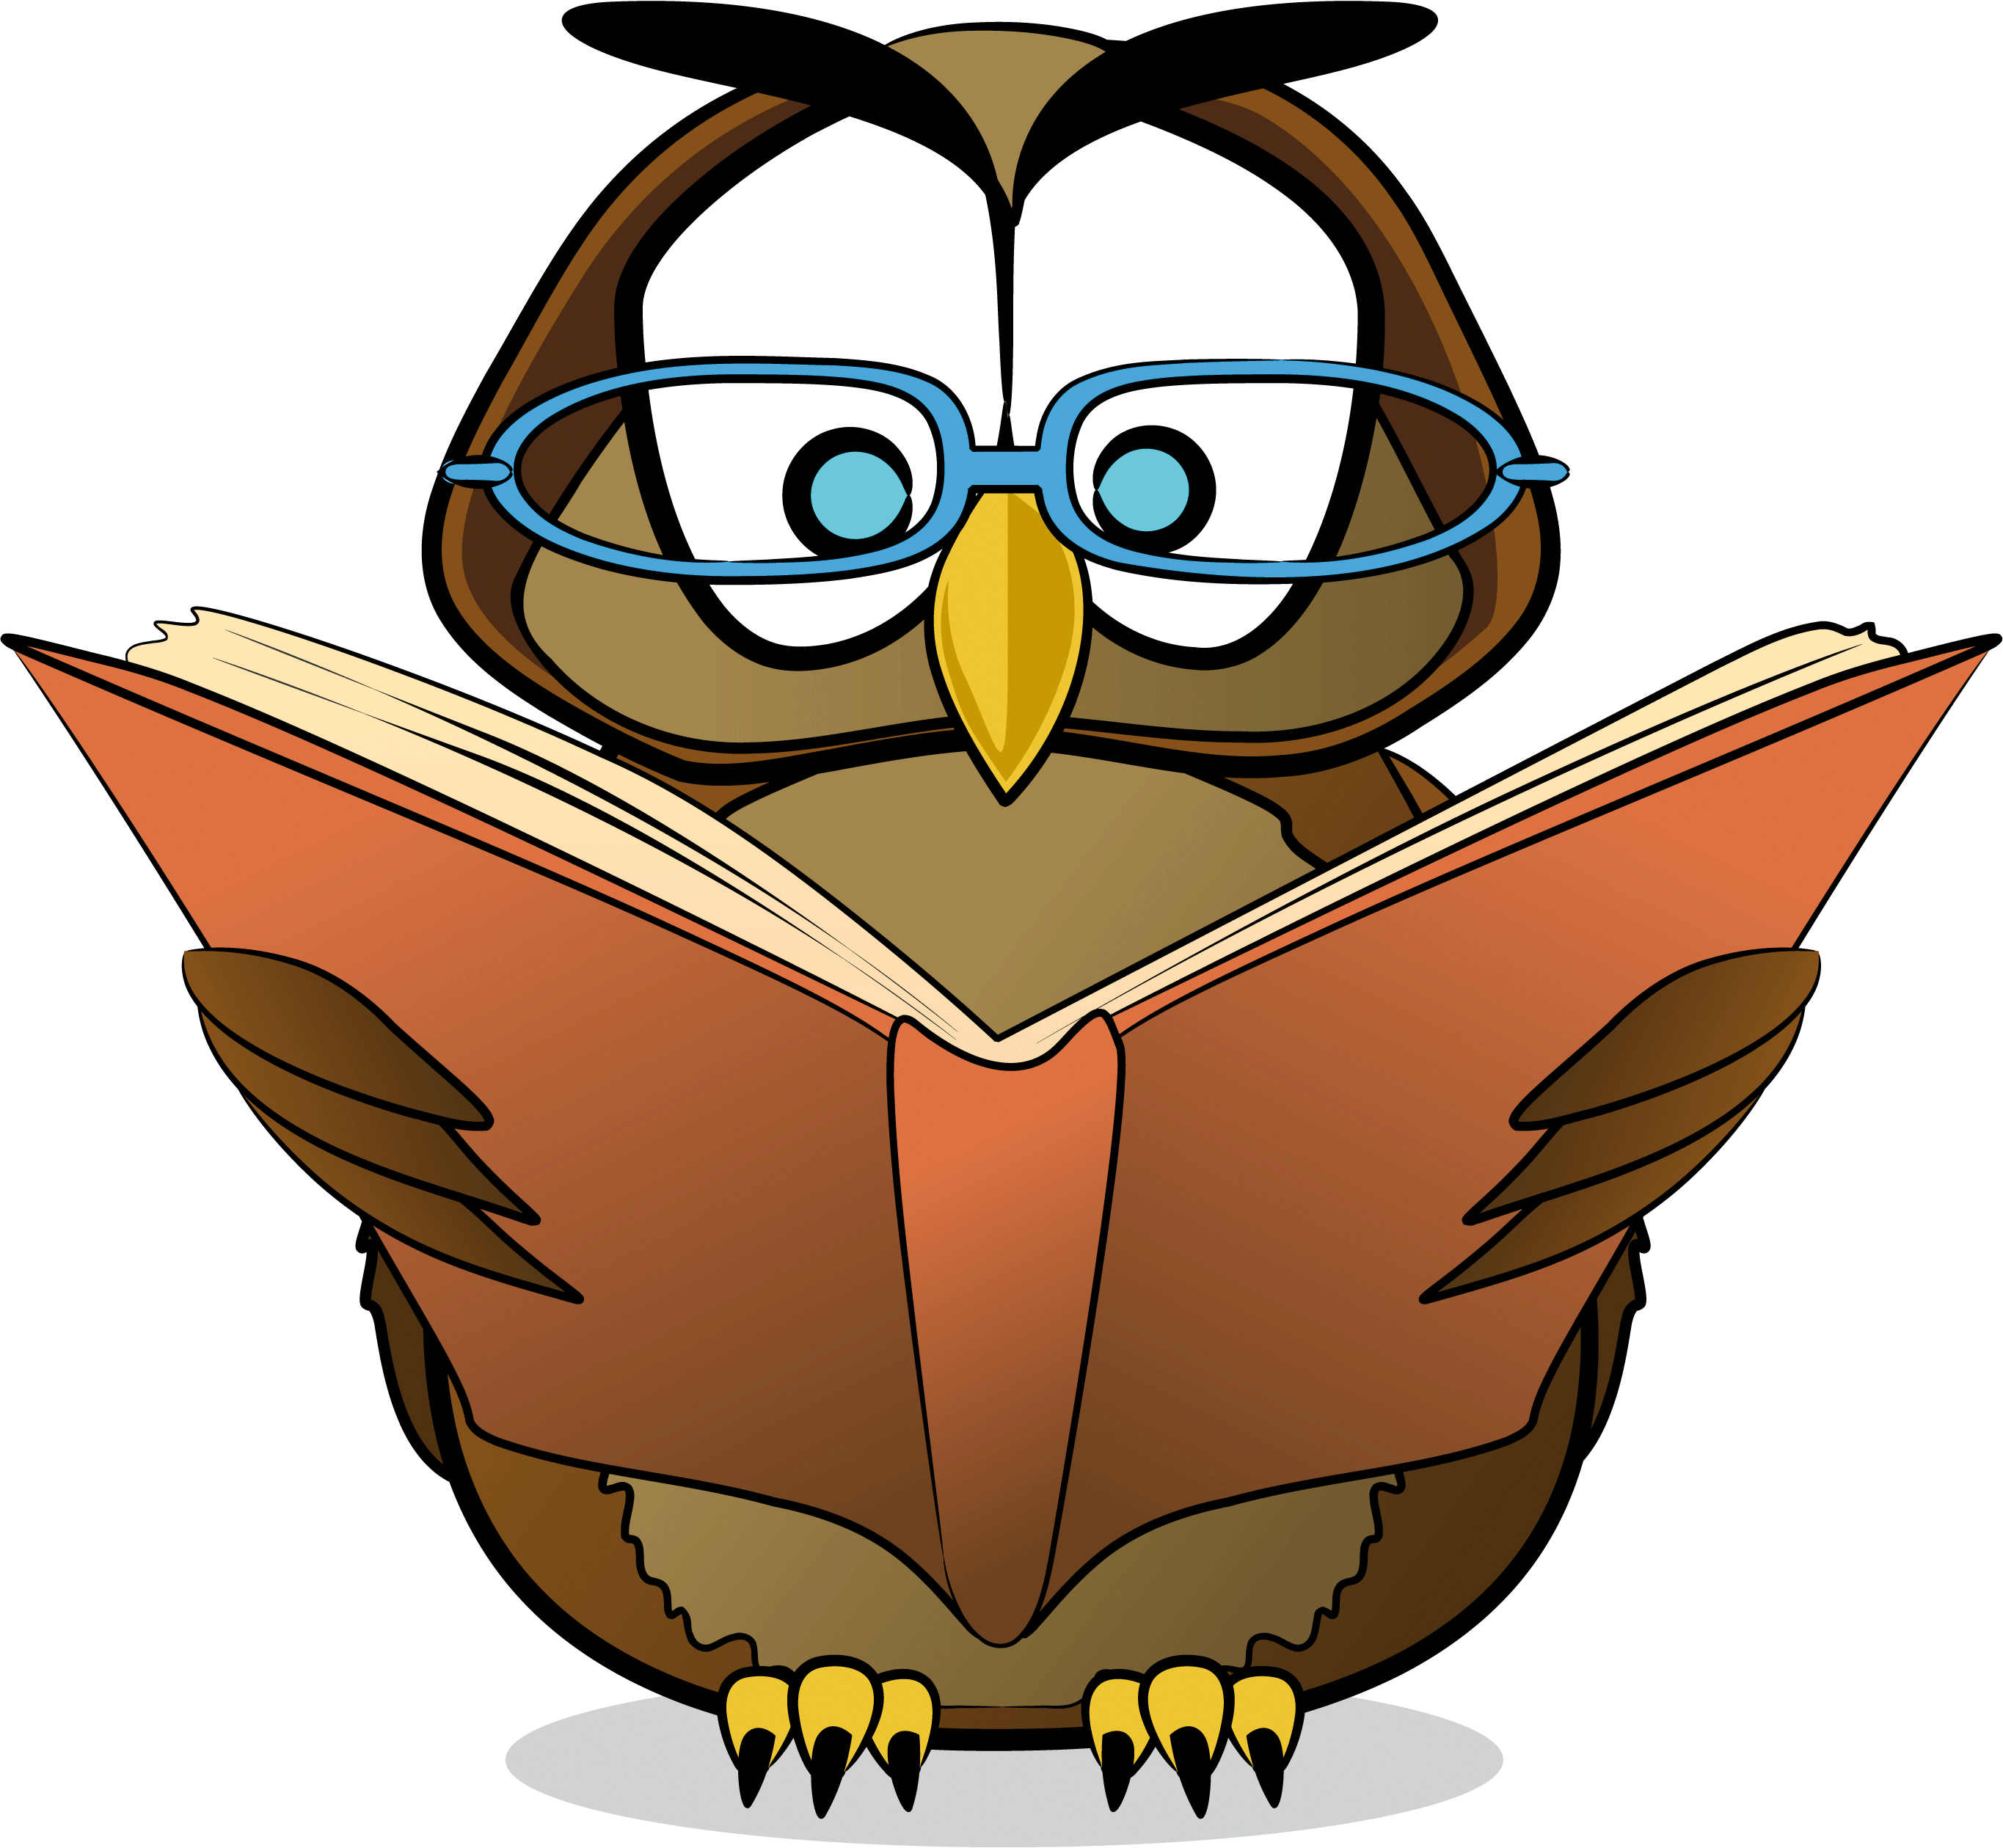 Owl Reading Clipart   Clipart Panda   Free Clipart Images